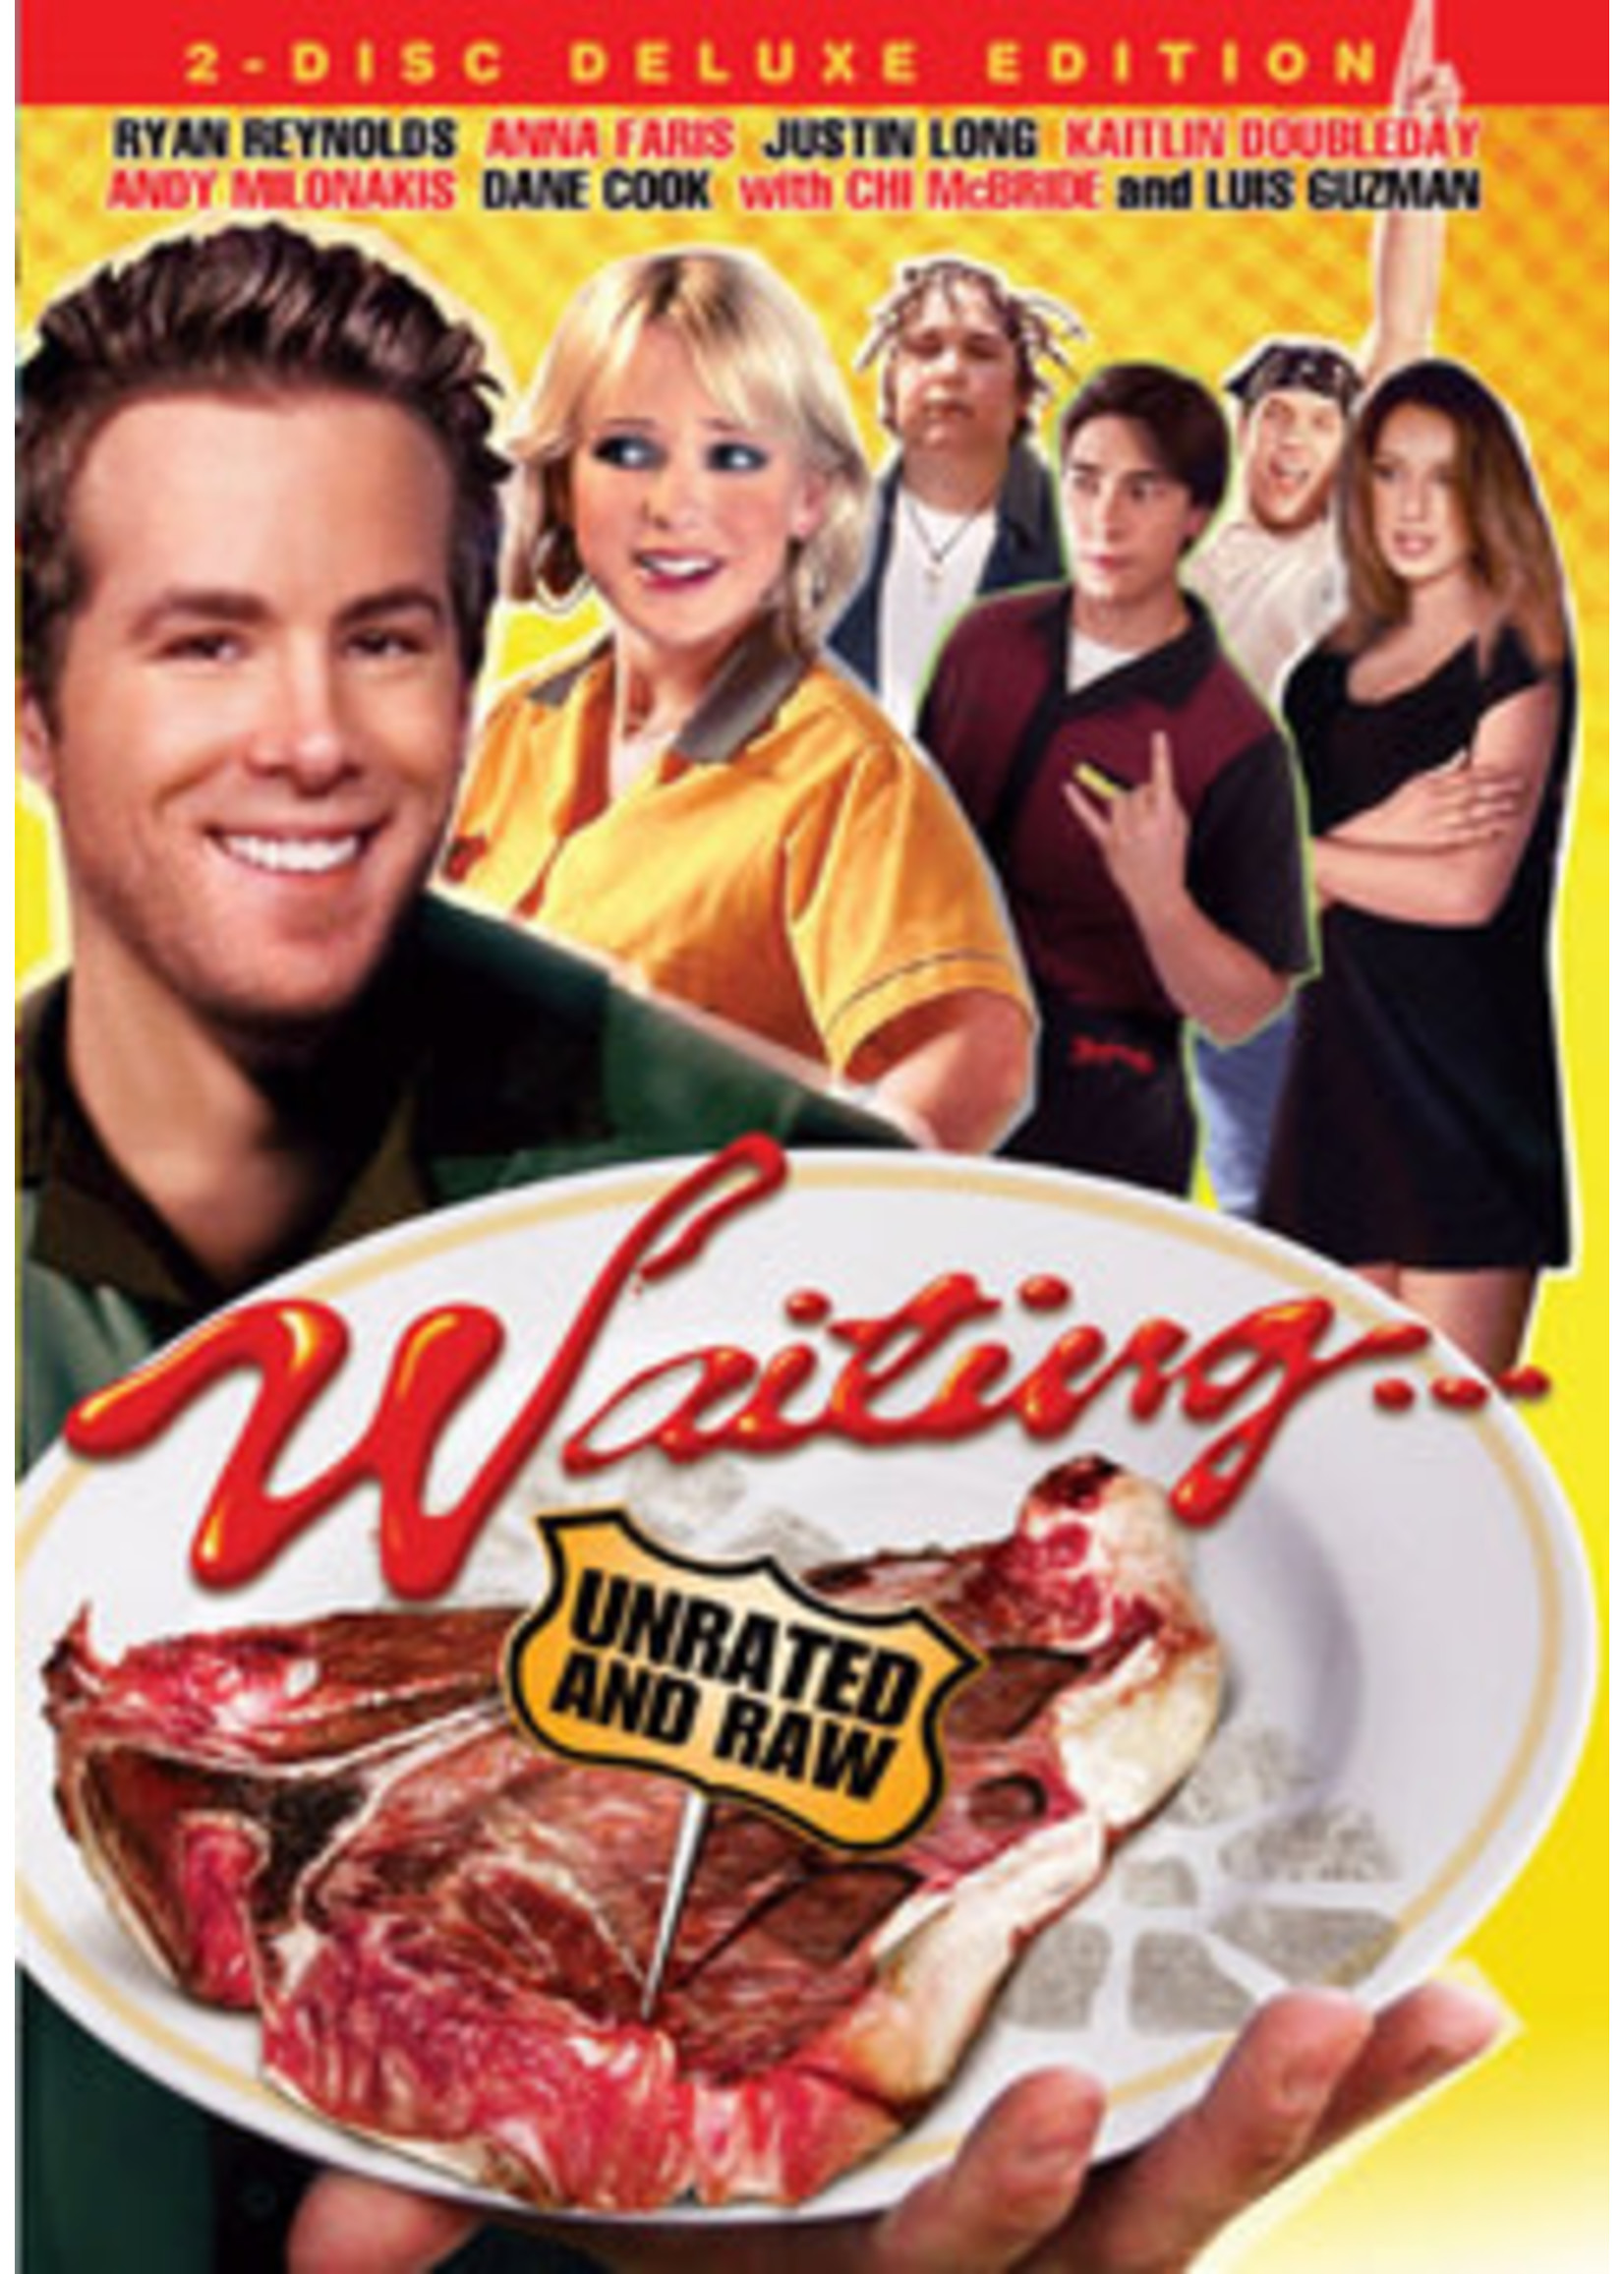 Waiting (2005) (Unrated) (DVD)